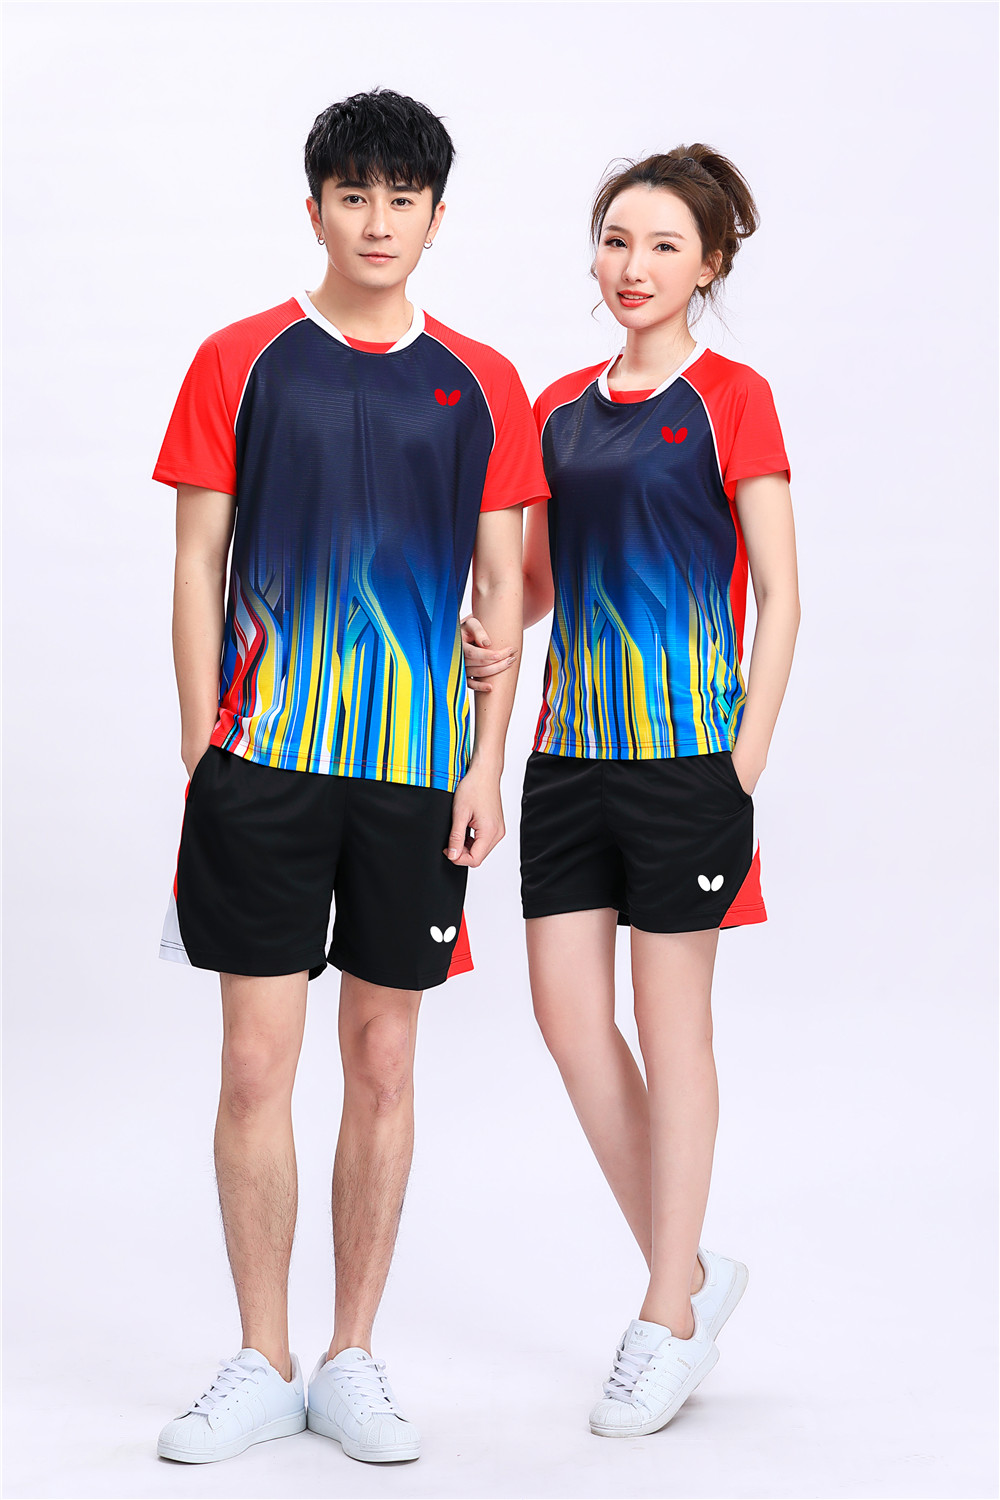 2021 New Butterfly PingPong 82115 Black T-Shirt Suit Table Tennis Badminton Quick Dry Suit